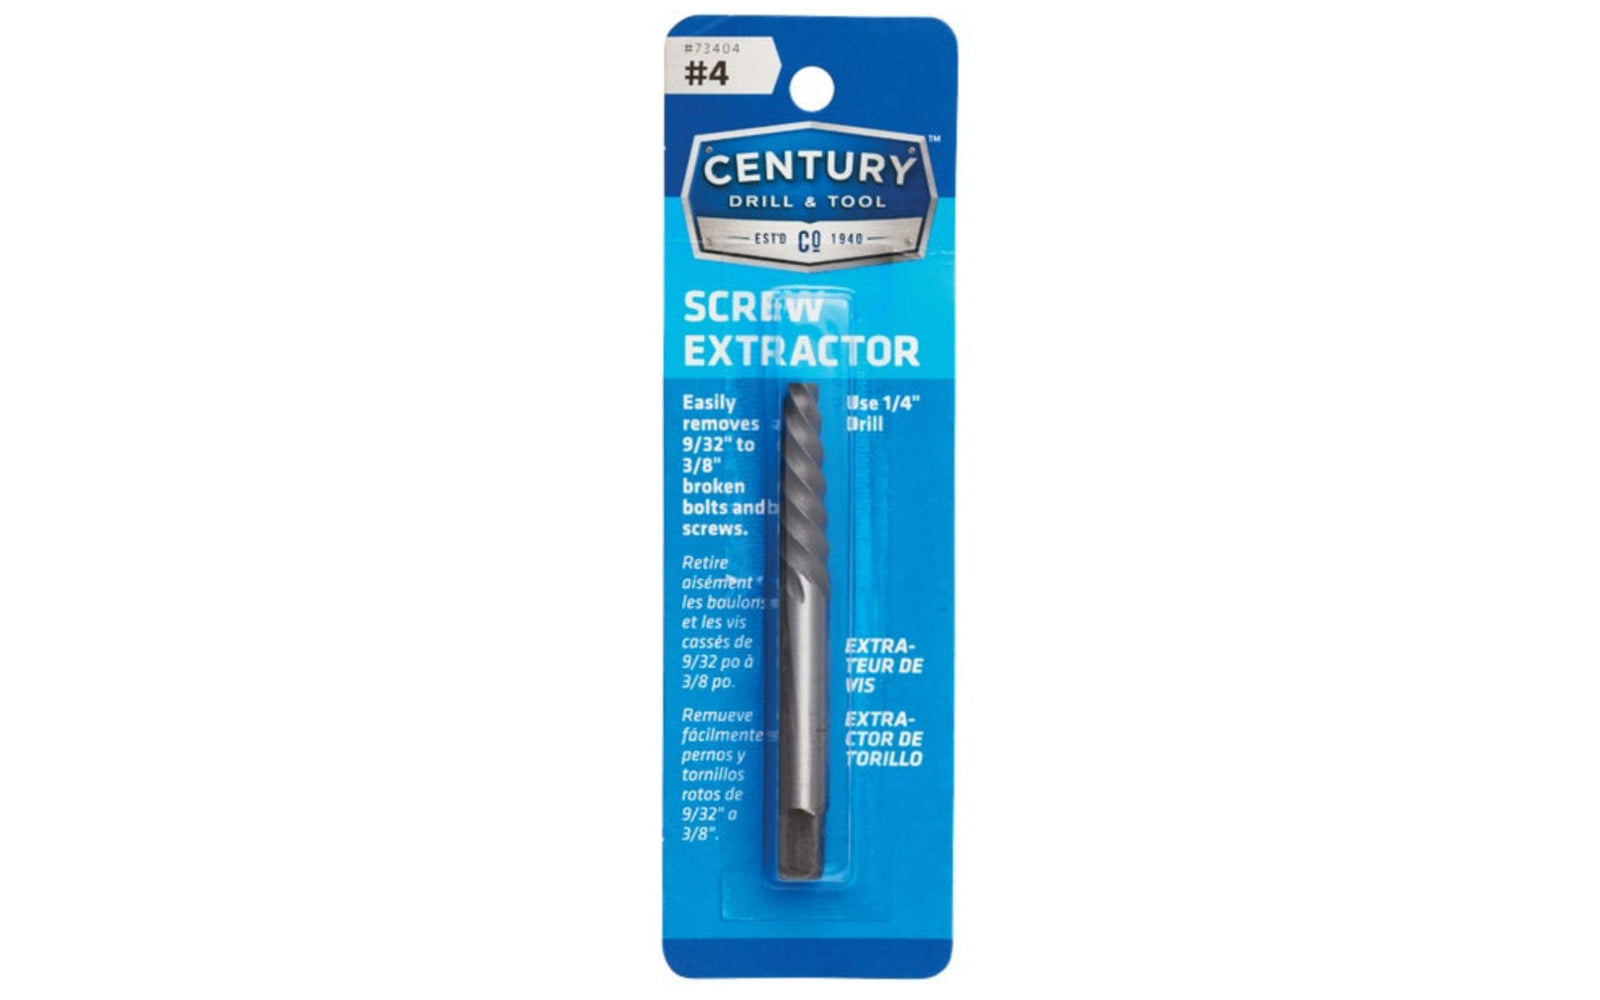 A Spiral Flute Screw Extractor made by Century Drill & Tool. Remove broken bolts & screws with these square shaft extractors. Ideal for thin wall extractions. #4 size.